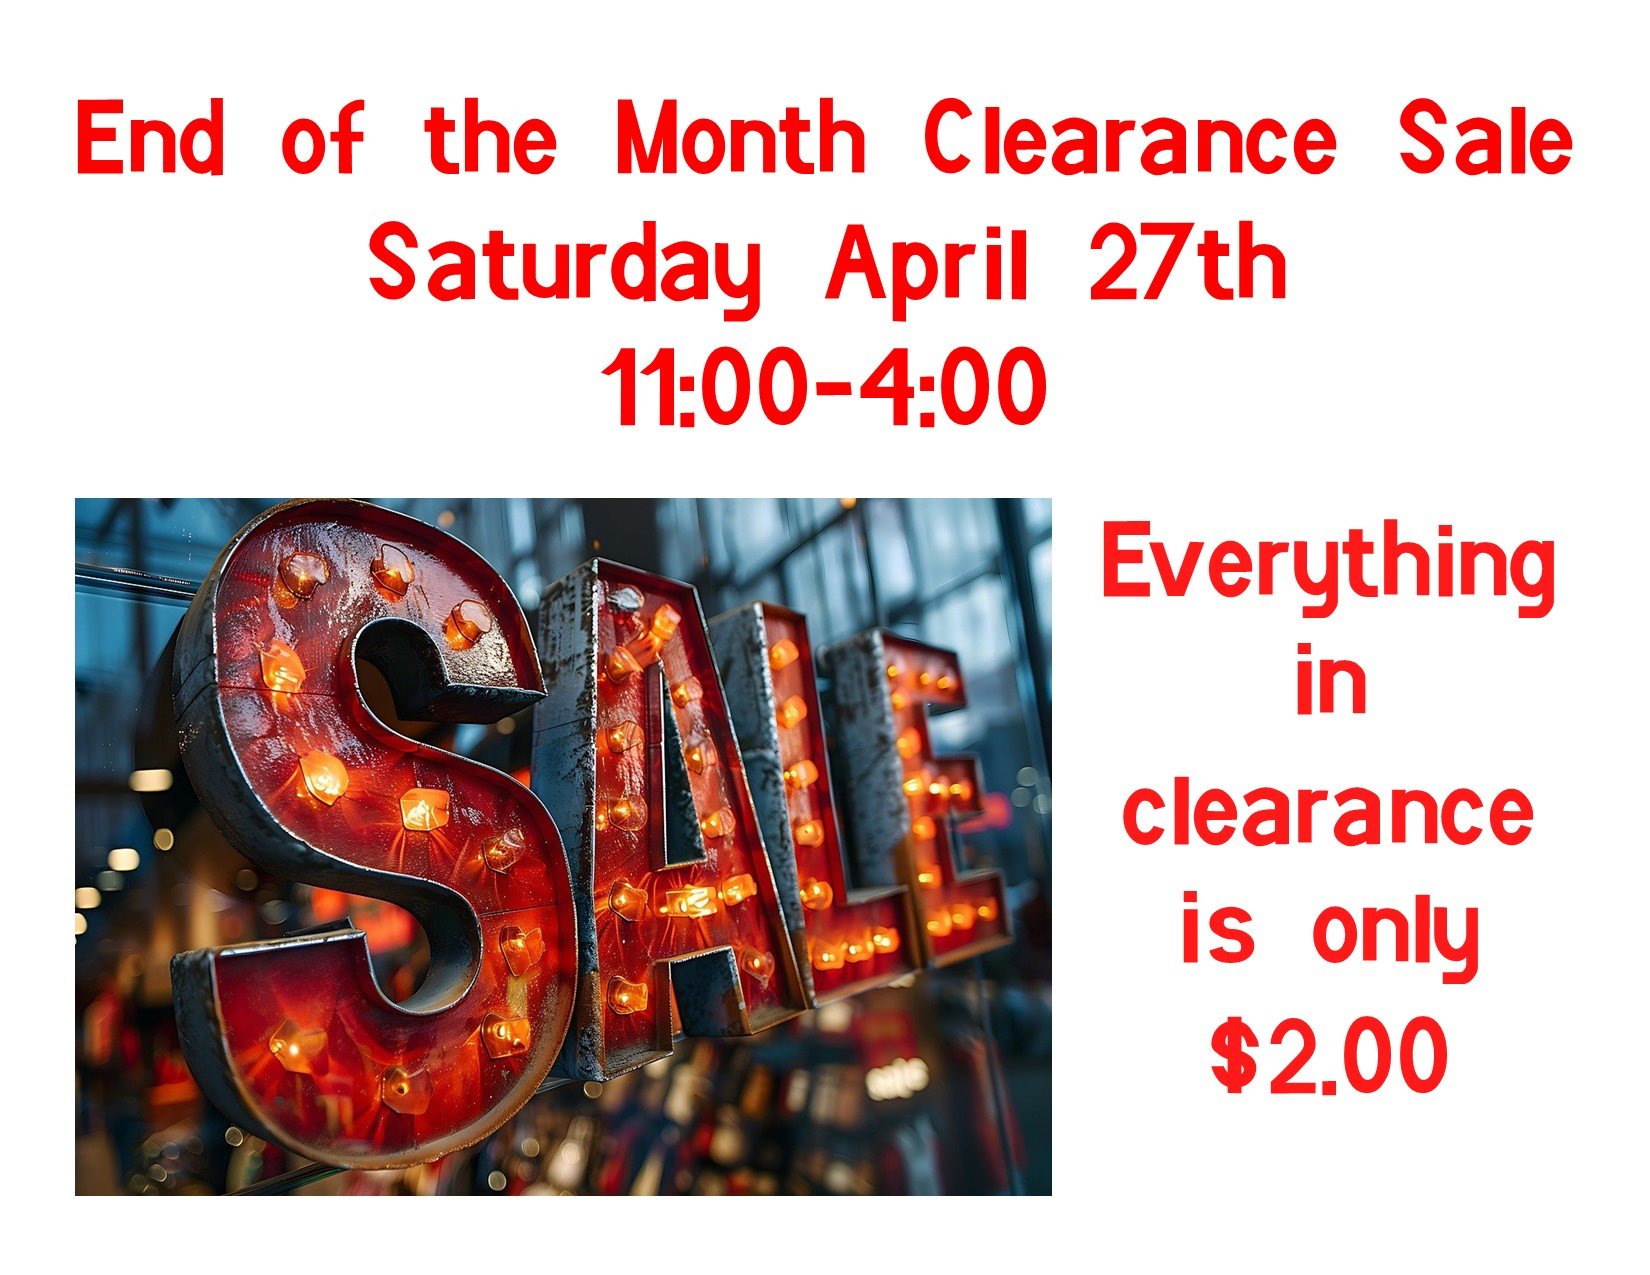 We have all your favorite brands in our clearance section and it's all just $2.00!
#carouselconsignmentsokemos #shoplocal #shopsmall #shopsmallbusiness #resalenotretail #shopconsignment #shopthrift #shopsecondhand #prelovedclothing #okemos #sustainab